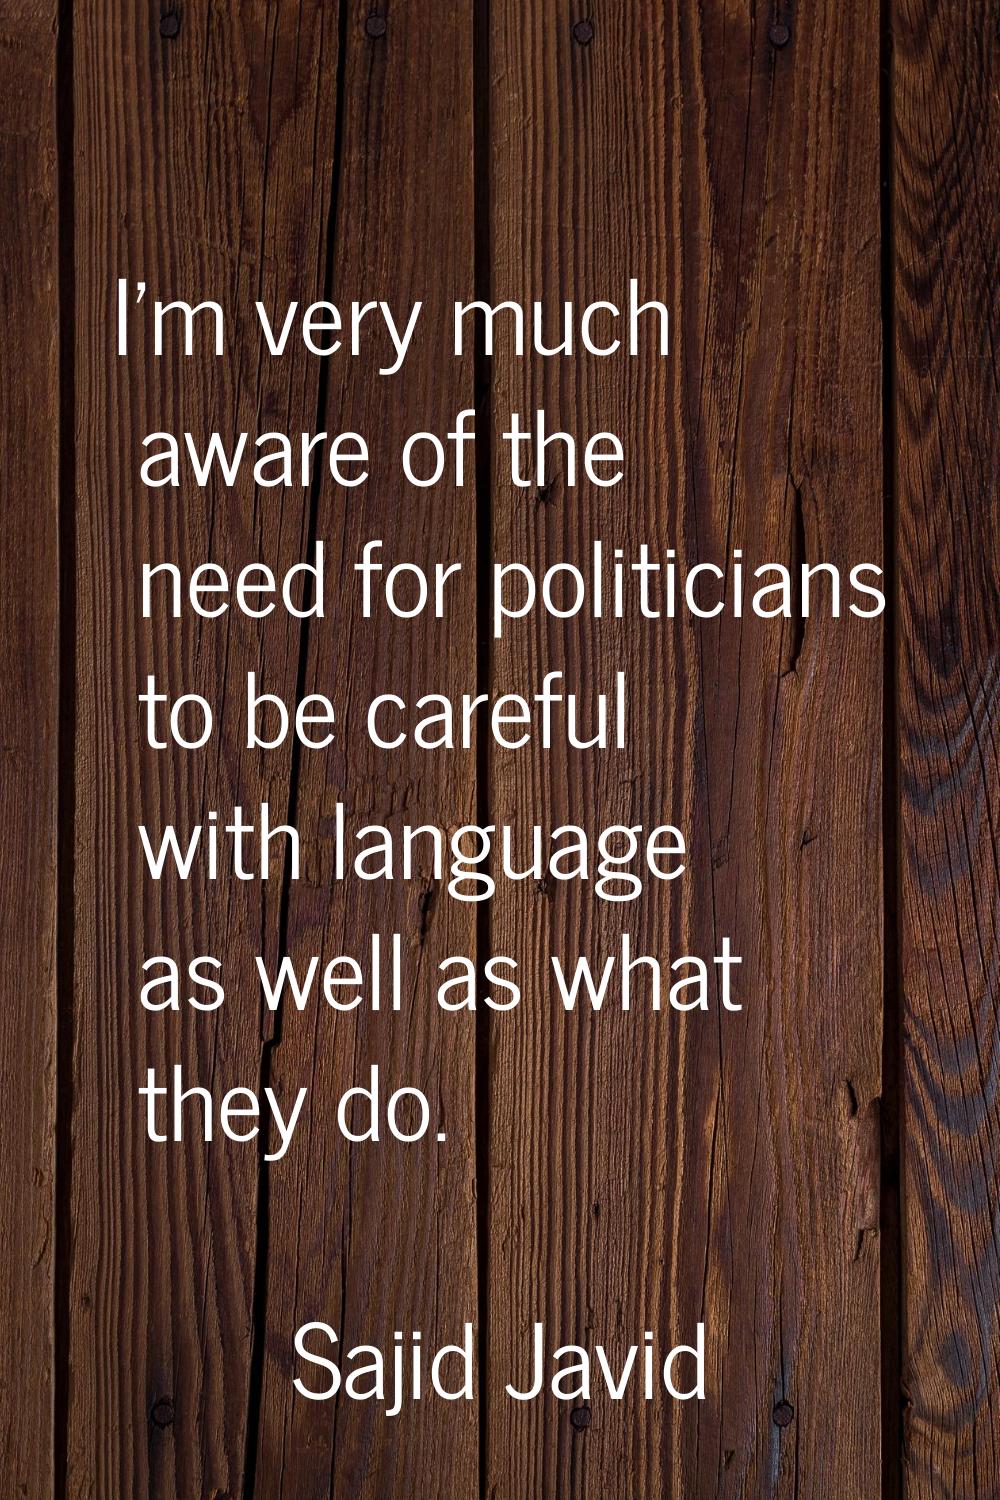 I'm very much aware of the need for politicians to be careful with language as well as what they do